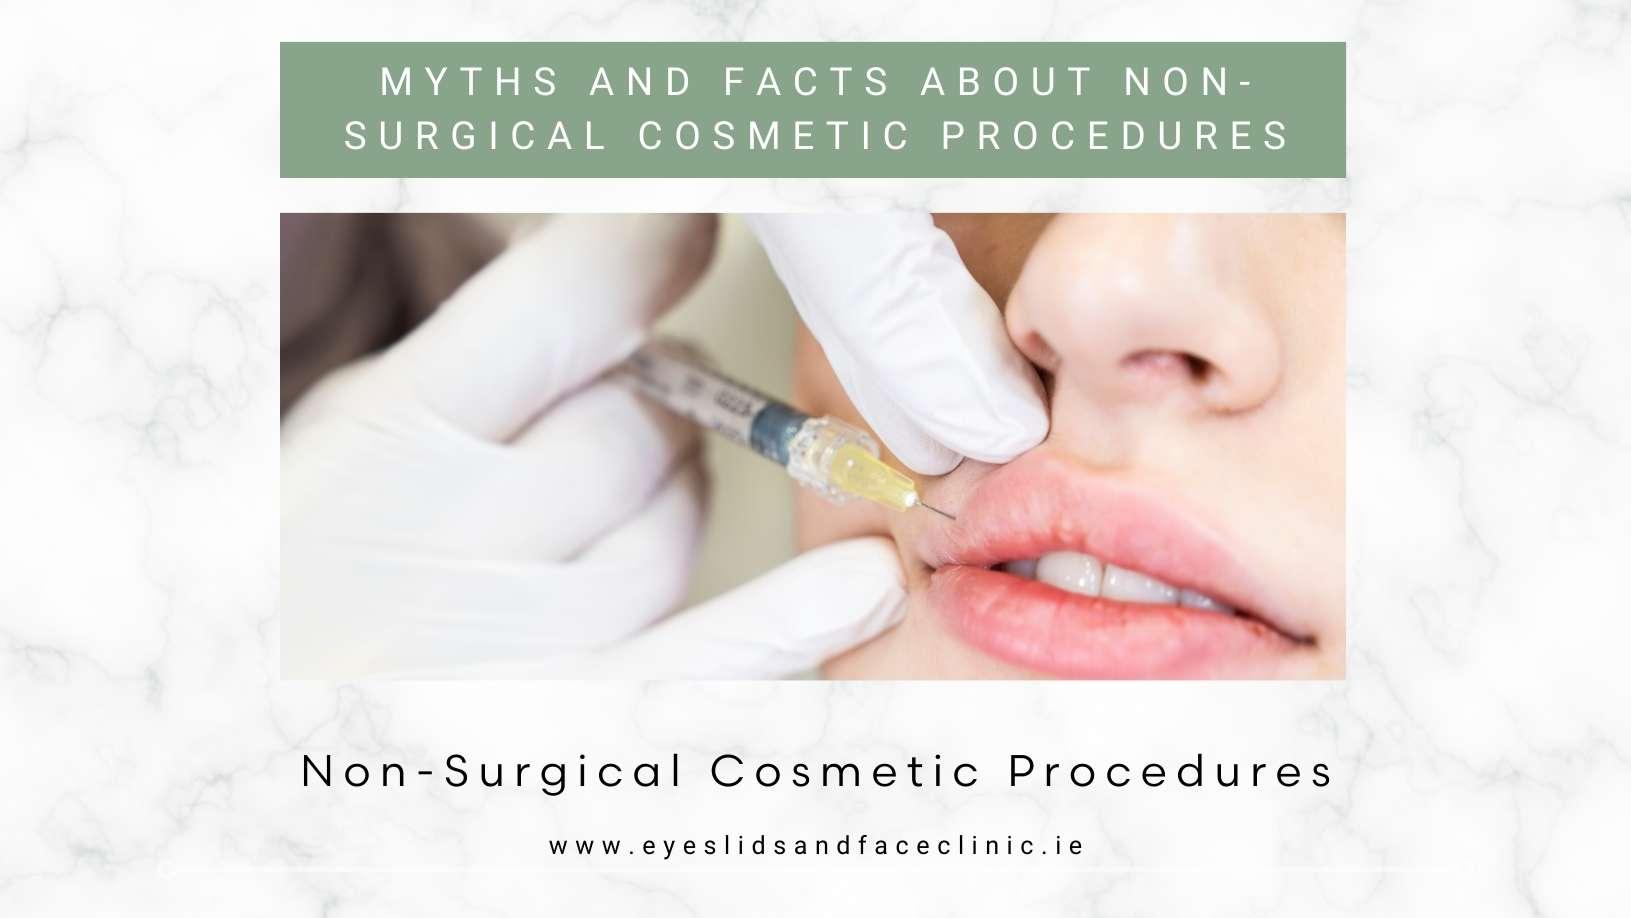 Myths & Facts about non-surgical cosmetic procedures